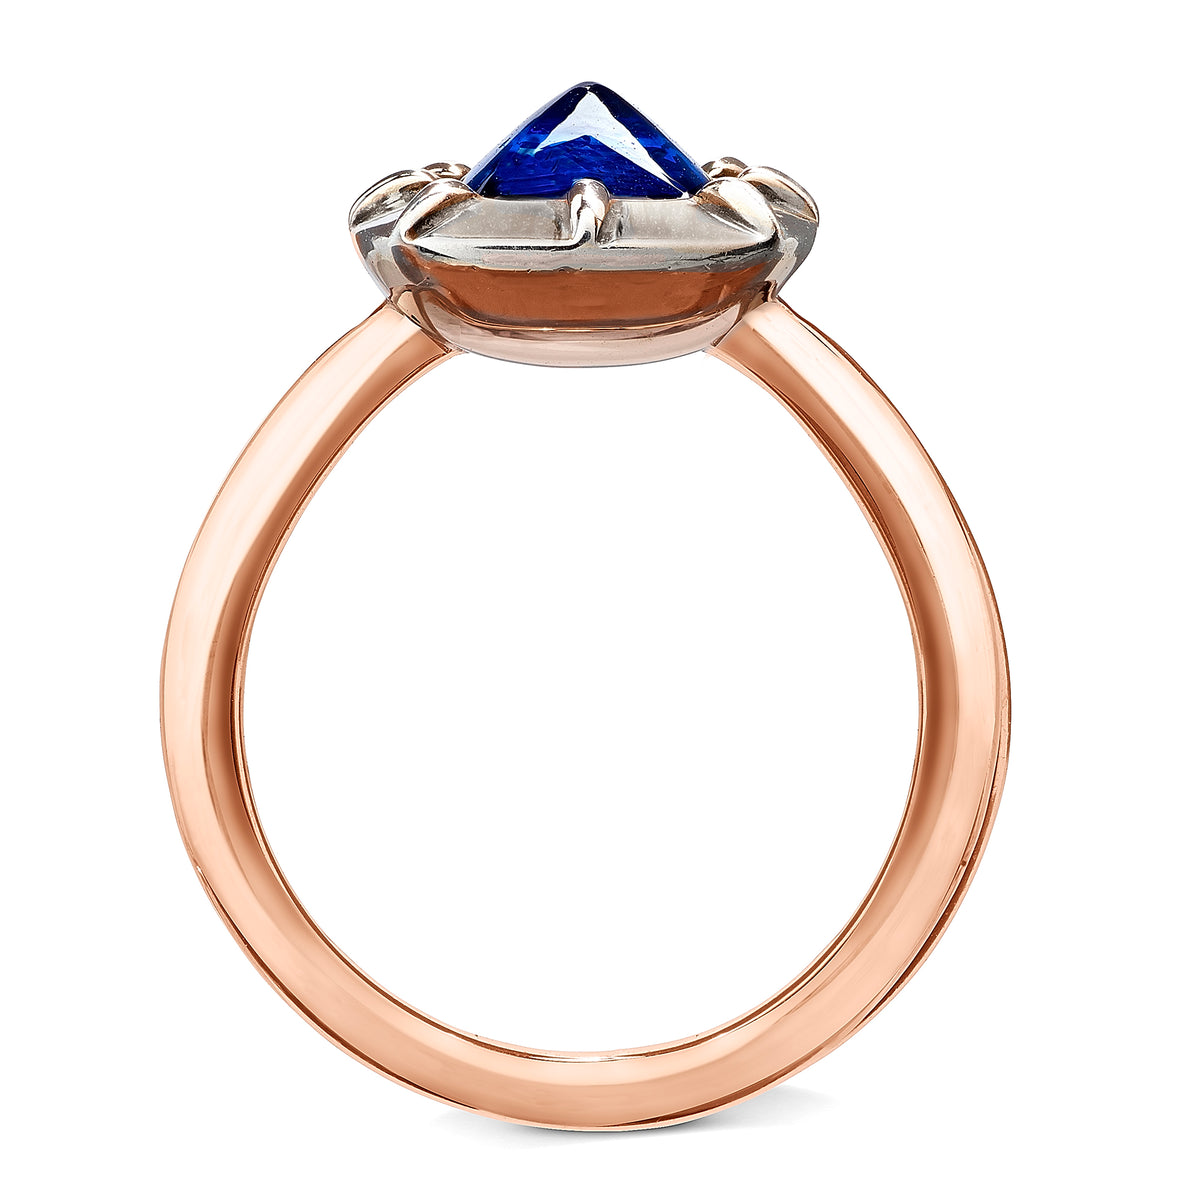 COLLET SAPPHIRE RING